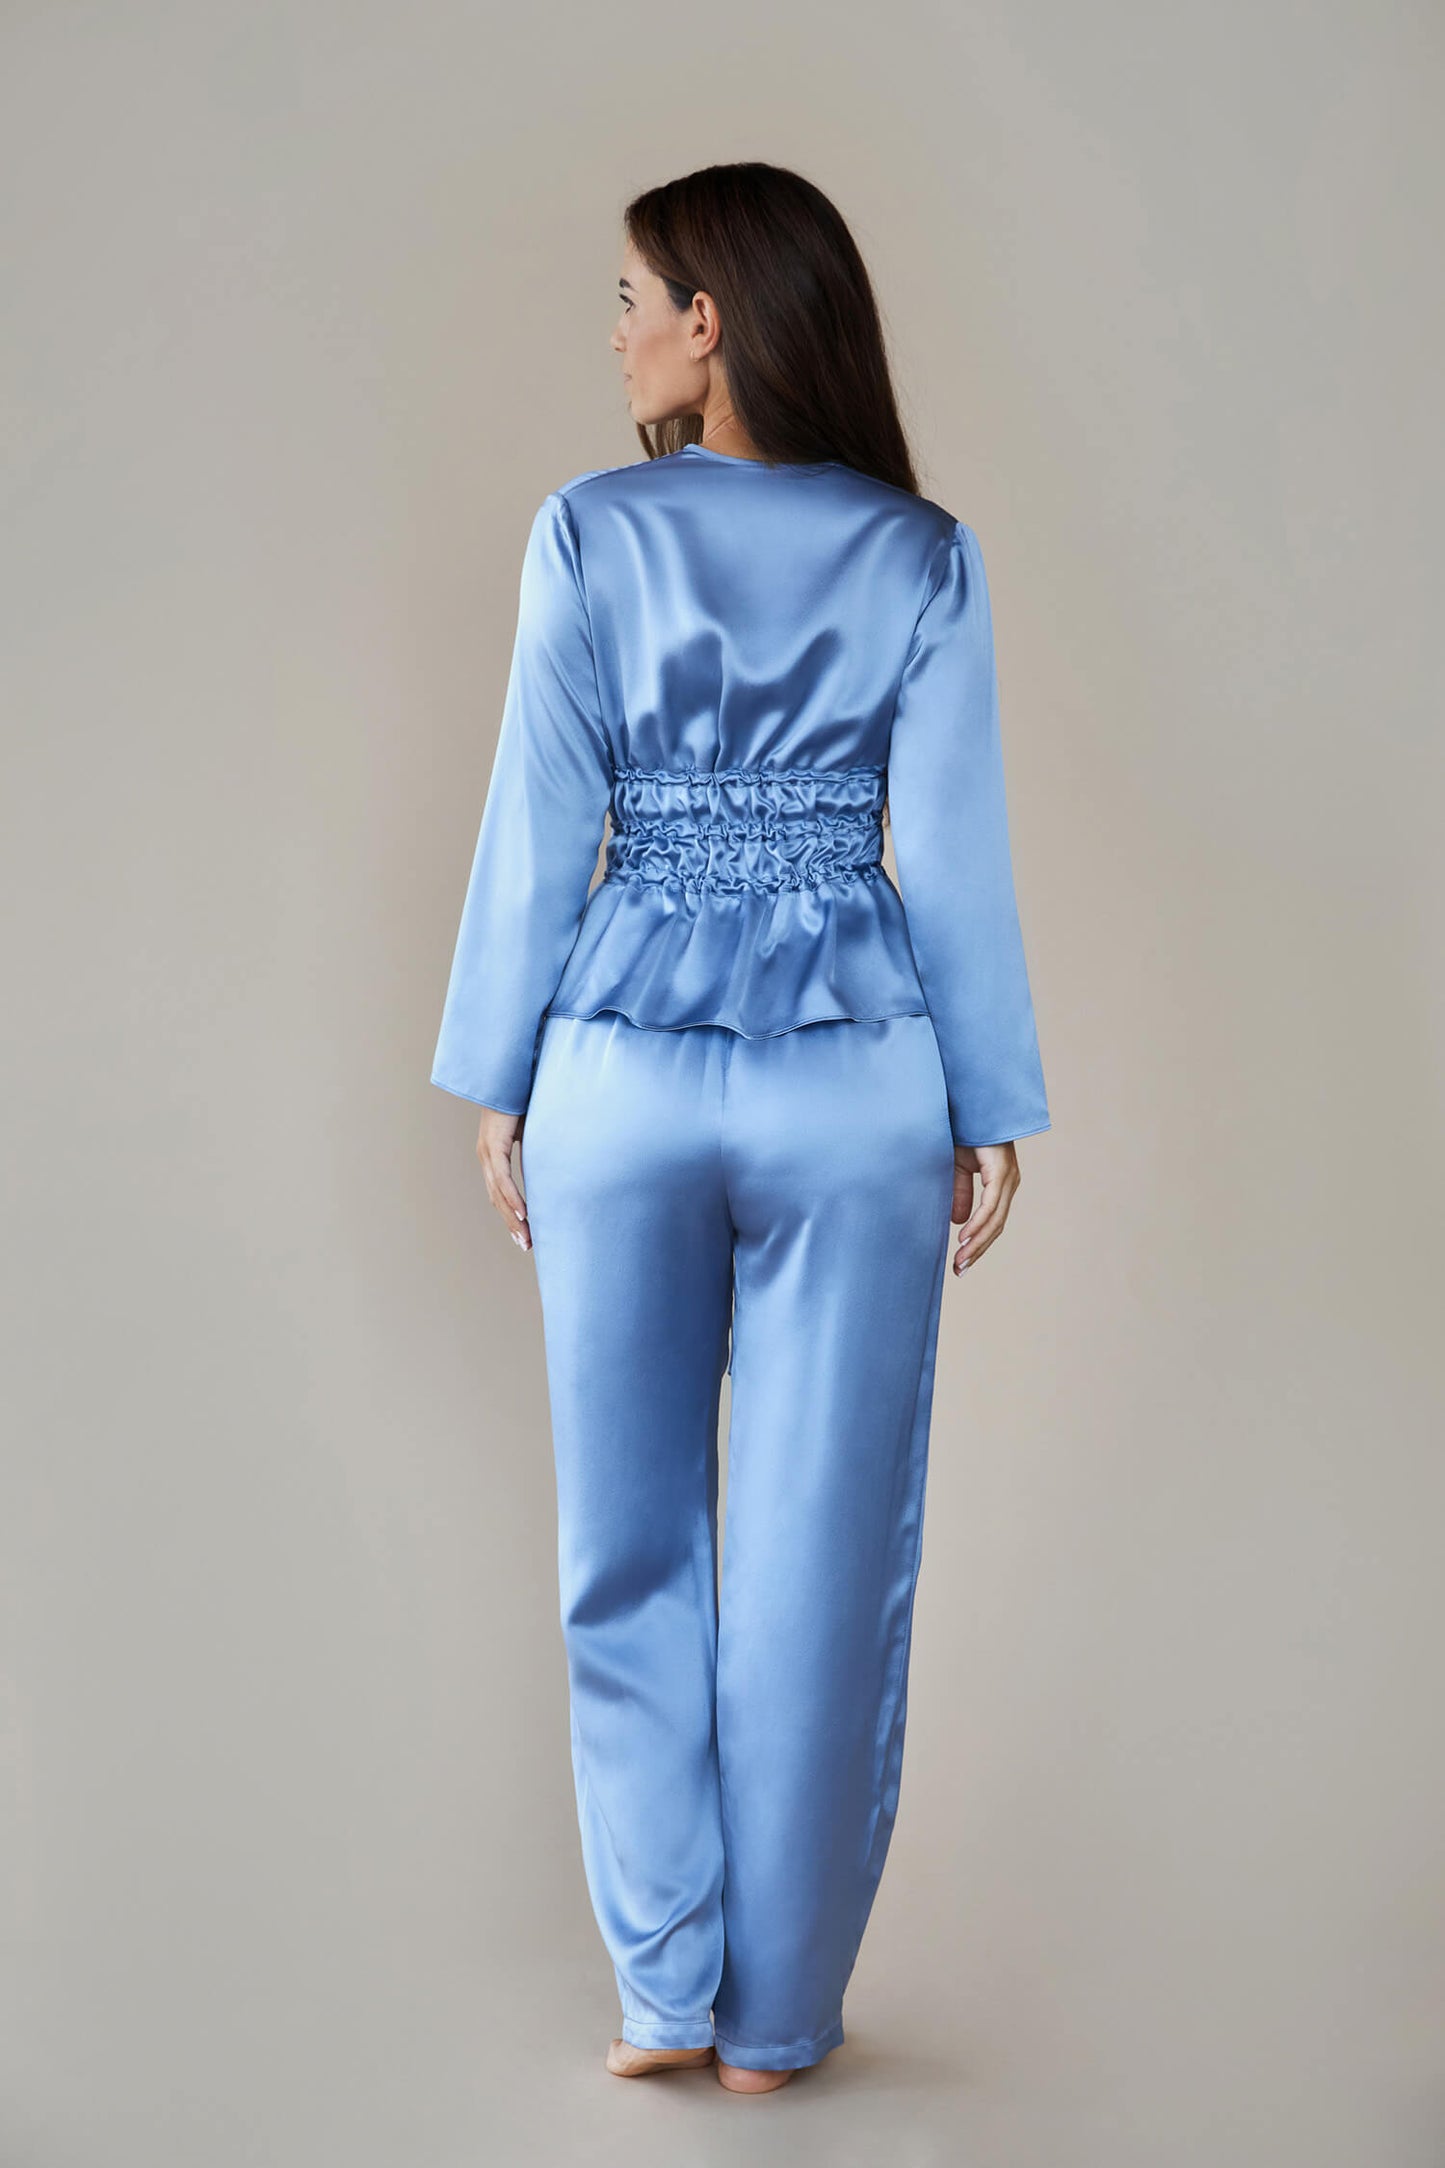 Shot from back to show the back of the set, the model wears silk satin loungewear set in colour pewter sky (blue). Her top is long sleeved with a corset style waist and she wears straight legged pyjama style silk trousers with a drawstring, elasticated waist.